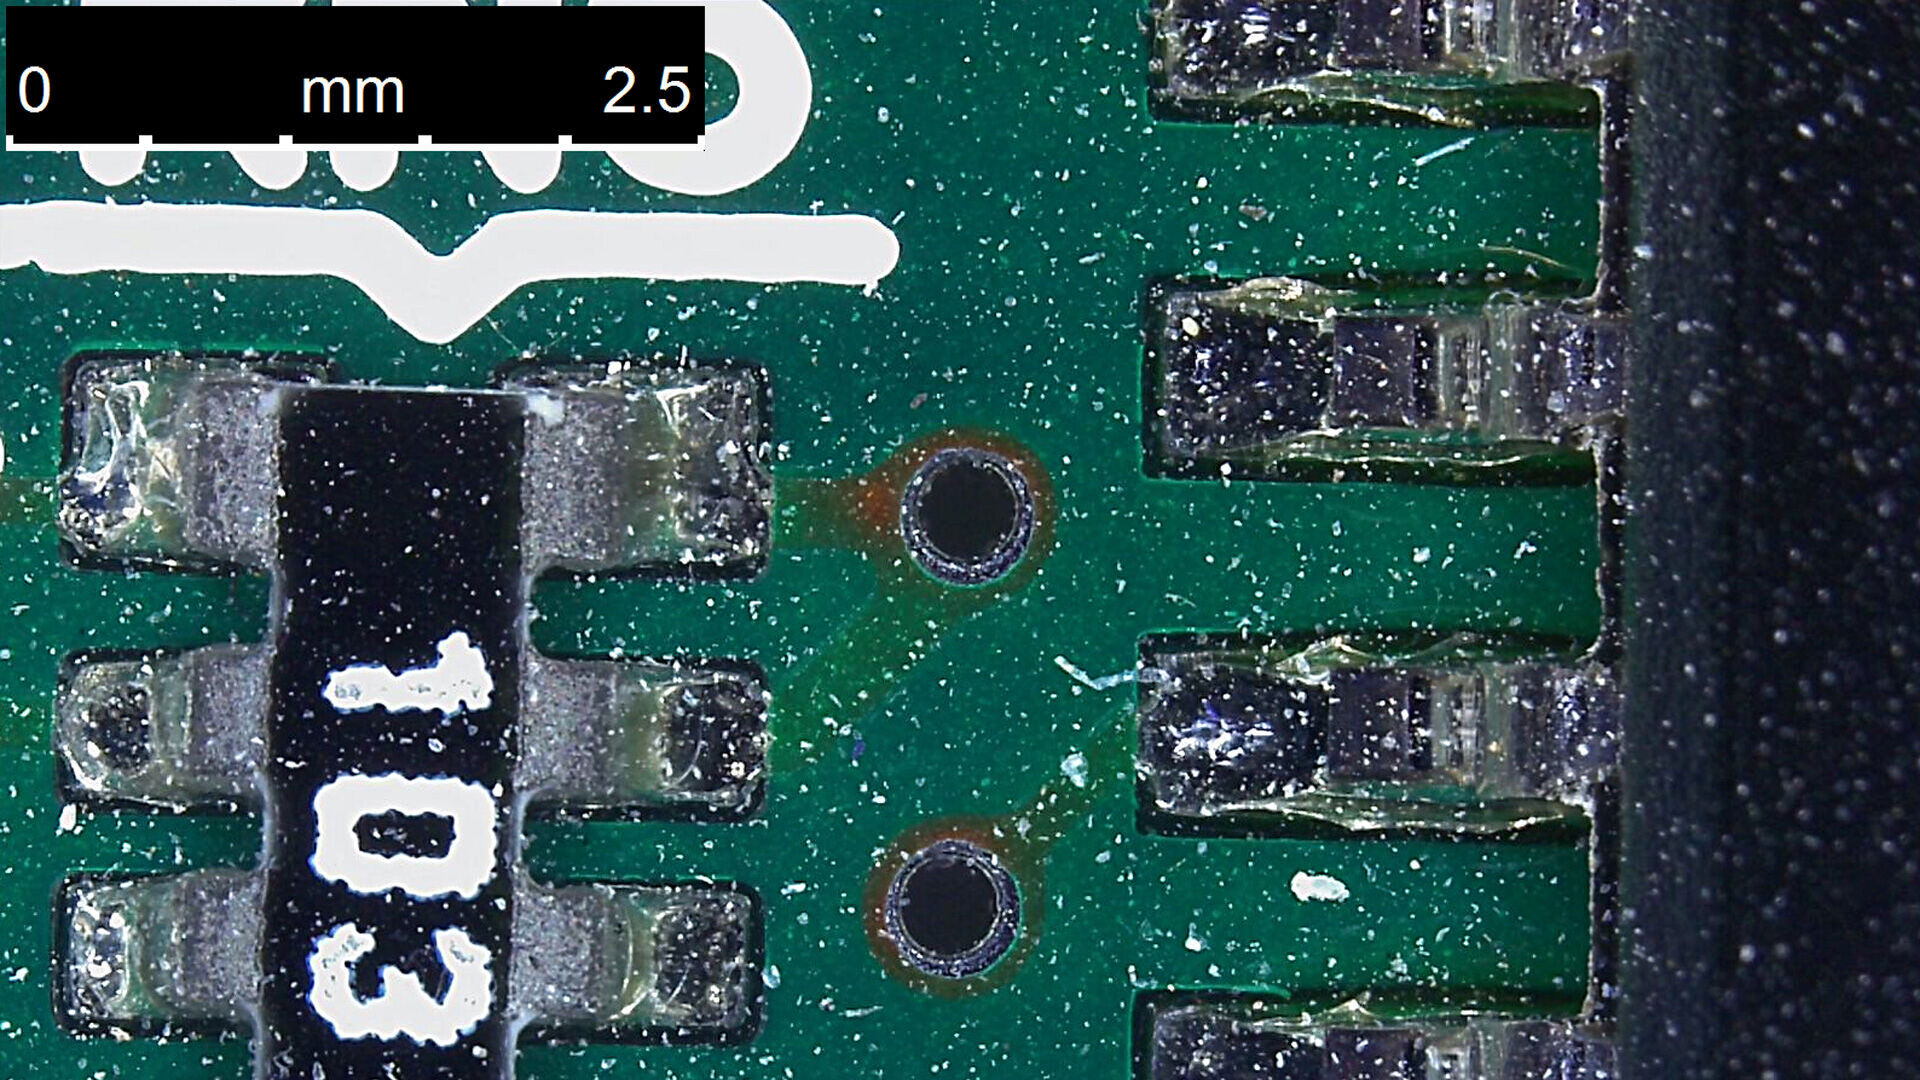 Glare from reflective surfaces of the PCB is eliminated. The same PCB area inspected with the DVM6 using ring light illumination and a polarizer